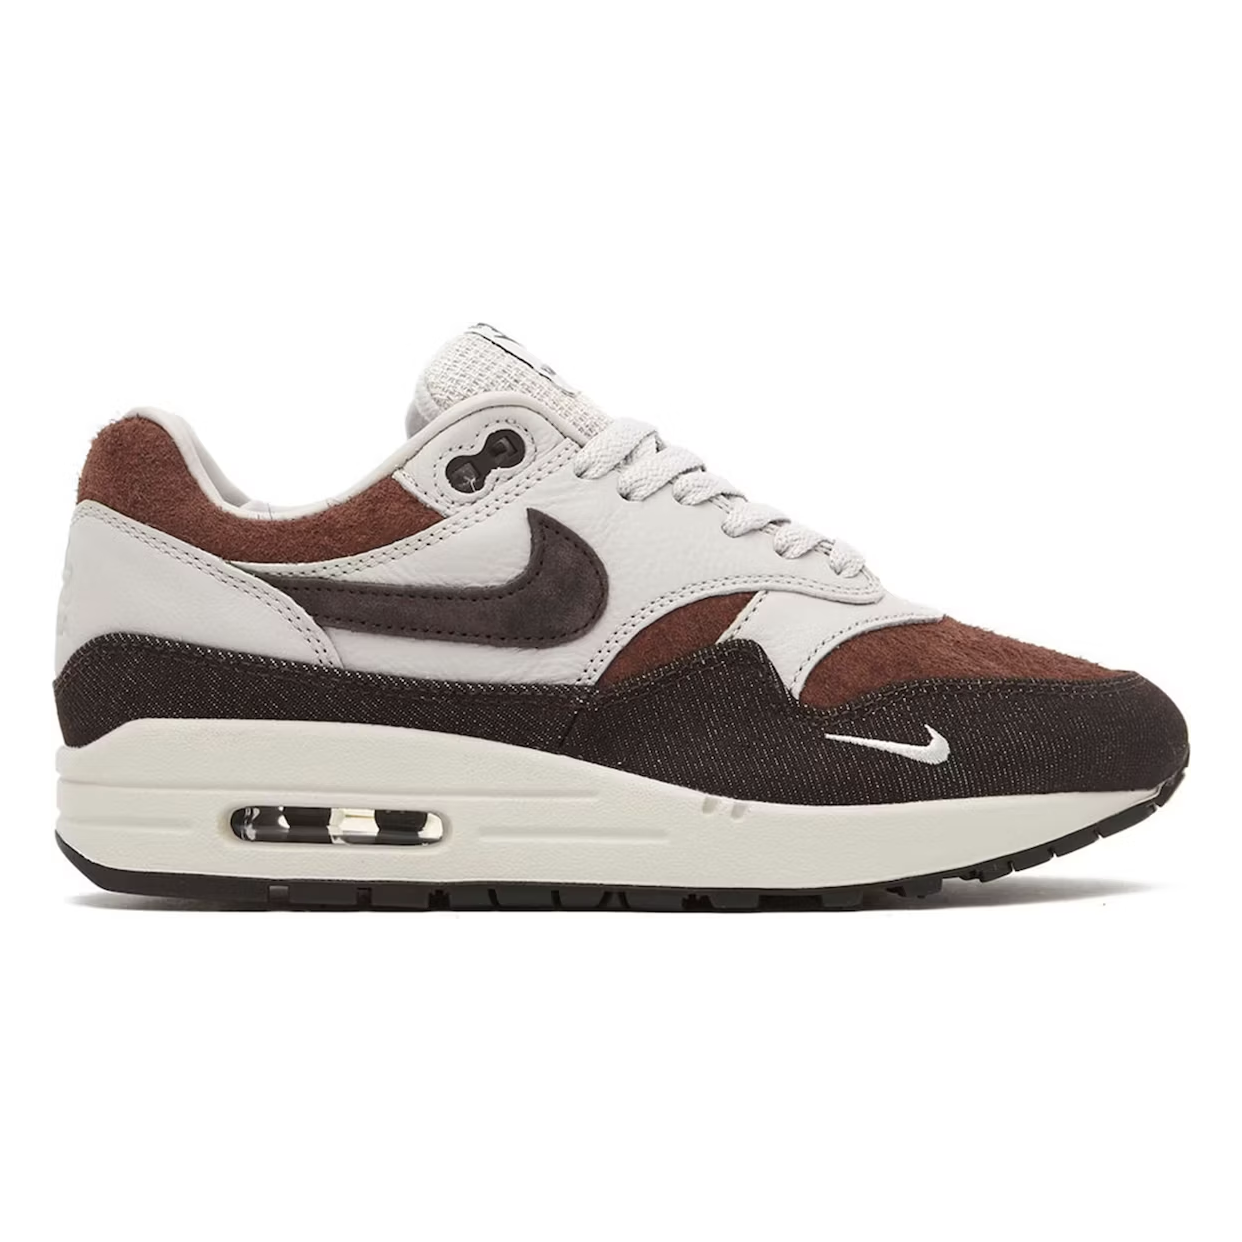 Nike Air Max 1 size? Exclusive Considered by Nike from £255.00